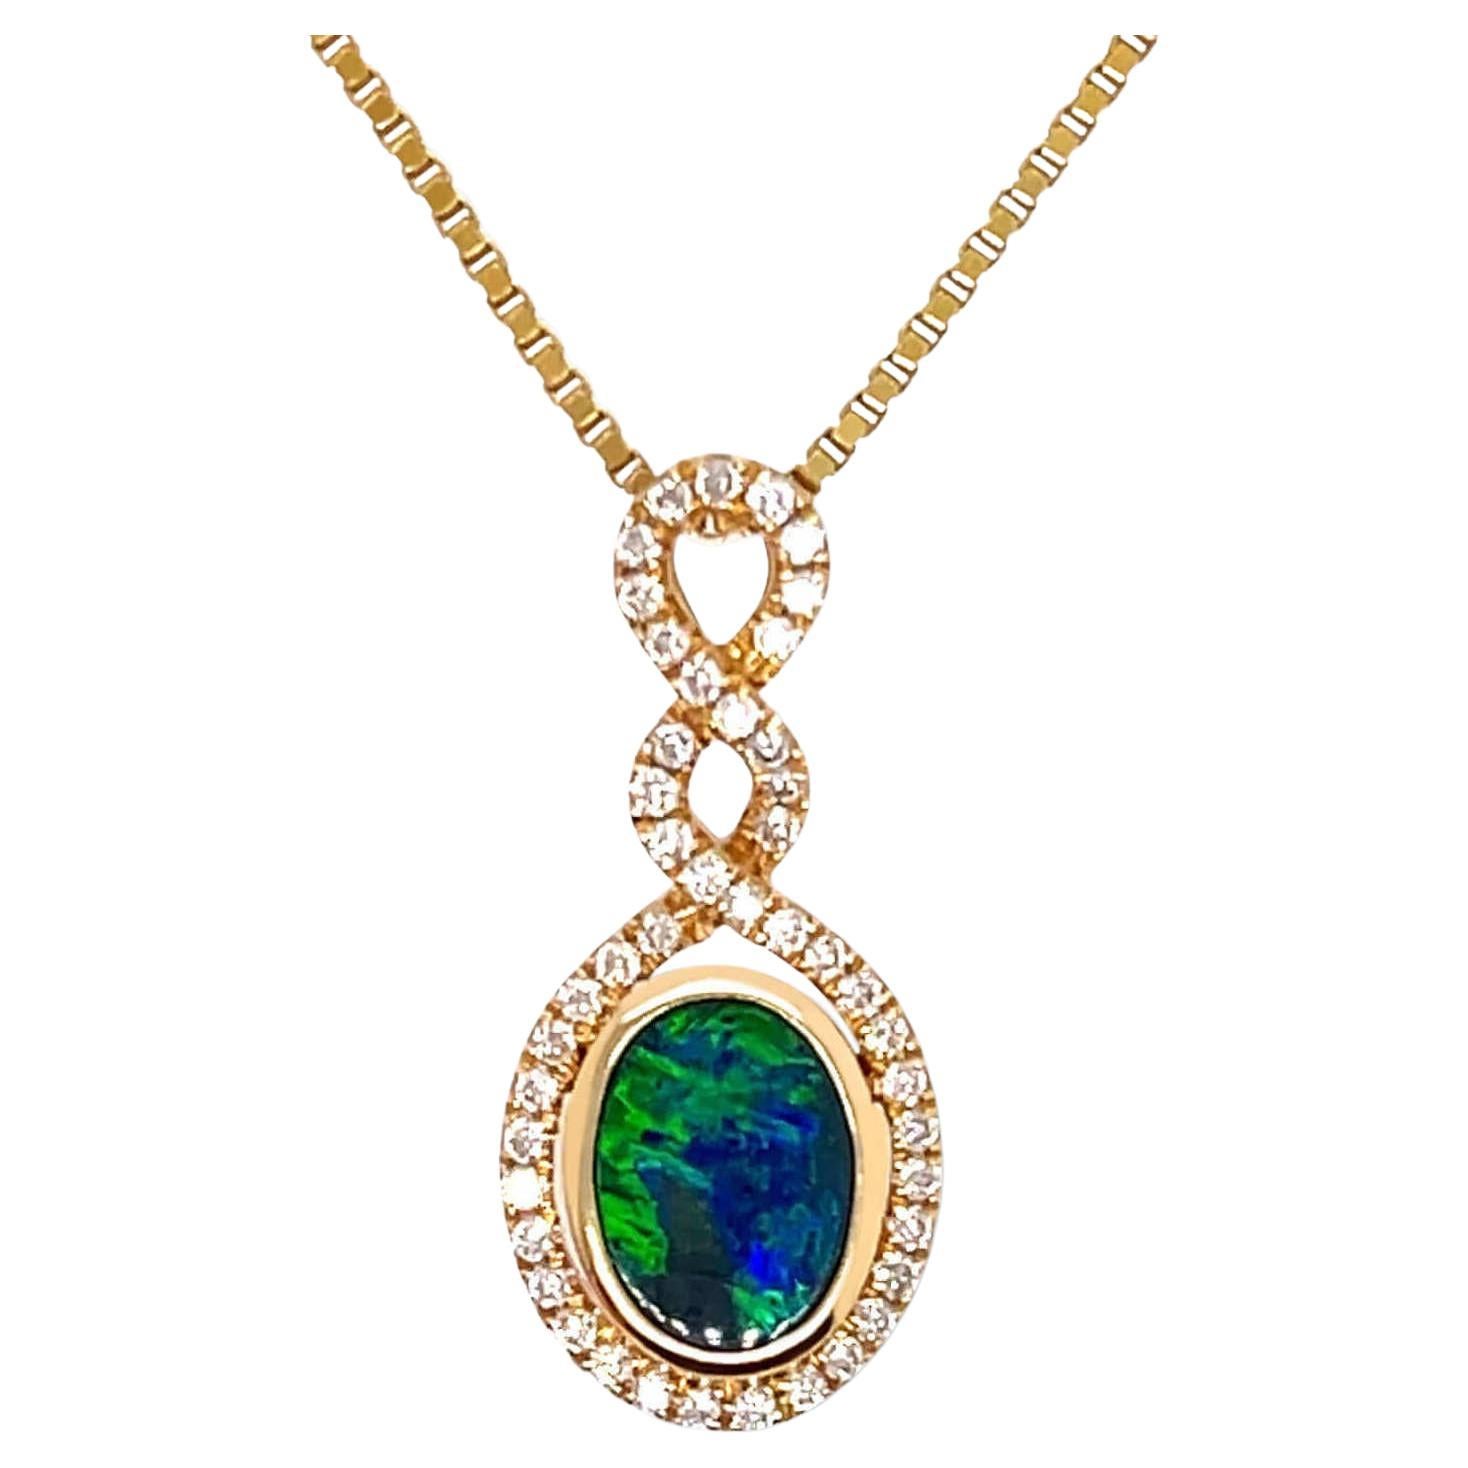 Australian 0.44ct Opal Doublet Pendant Necklace in 18K Yellow Gold with Diamonds